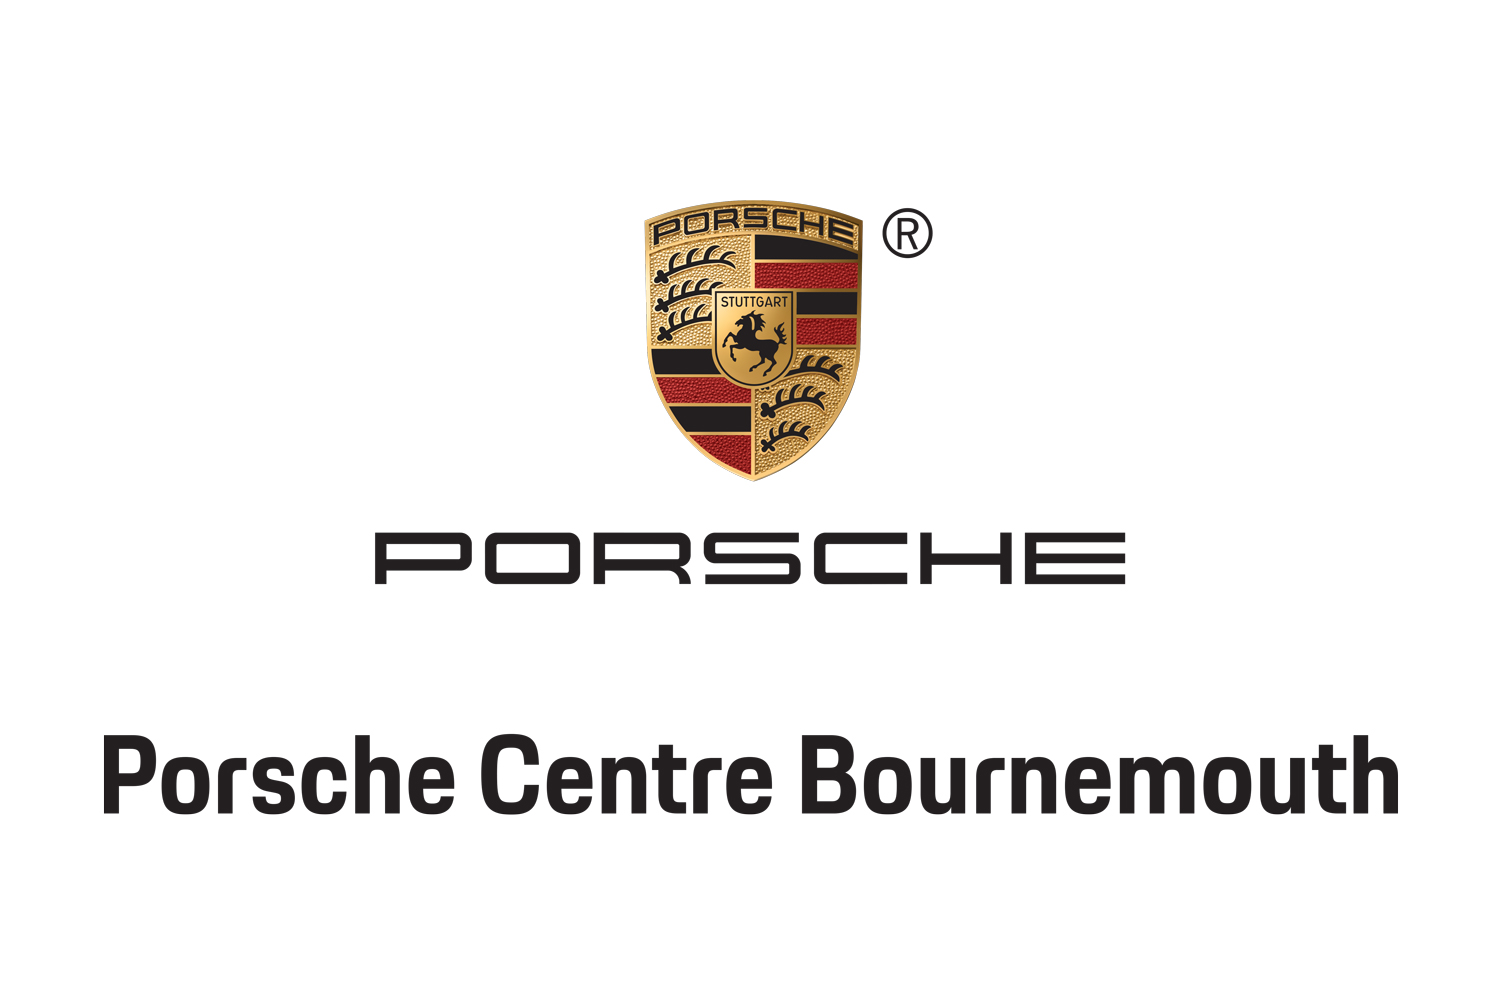 {&quot;id&quot;:&quot;312e0446-ed9d-4505-8223-30be1416d5bd&quot;,&quot;name&quot;:&quot;Porsche Centre Bournemouth&quot;,&quot;email&quot;:&quot;william.keep@porschebournemouth.co.uk&quot;,&quot;email_verified_at&quot;:&quot;2023-07-17T09:49:35.000000Z&quot;,&quot;role_id&quot;:3,&quot;current_team_id&quot;:null,&quot;profile_photo_path&quot;:&quot;profile-photos\/vNbzZukQV5PCkSjka29WW8unwevDWD4zUUHdaK8T.jpg&quot;,&quot;created_at&quot;:&quot;2023-07-17T09:49:35.000000Z&quot;,&quot;updated_at&quot;:&quot;2024-01-22T15:59:27.000000Z&quot;,&quot;pm_type&quot;:&quot;visa&quot;,&quot;pm_last_four&quot;:&quot;0928&quot;,&quot;connected_account_id&quot;:null,&quot;has_onboarded&quot;:1,&quot;classifieds_count&quot;:7,&quot;profile_photo_url&quot;:&quot;https:\/\/9werks.co.uk\/storage\/profile-photos\/vNbzZukQV5PCkSjka29WW8unwevDWD4zUUHdaK8T.jpg&quot;,&quot;is_subscriber&quot;:false,&quot;is_admin&quot;:false,&quot;is_partner&quot;:true,&quot;profile&quot;:{&quot;id&quot;:1783,&quot;user_id&quot;:&quot;312e0446-ed9d-4505-8223-30be1416d5bd&quot;,&quot;bio&quot;:&quot;Porsche Centre Bournemouth has been operating on the South coast for over forty years, it has recently moved into network leading facilities and has been accredited by Porsche with \u2018Porsche Classic\u2019 status, this makes it one of only five centres in the UK to be certified classic centre.&quot;,&quot;created_at&quot;:&quot;2023-07-17T09:49:35.000000Z&quot;,&quot;updated_at&quot;:&quot;2023-07-17T10:00:01.000000Z&quot;,&quot;street1&quot;:&quot;Cobham Rd, Ferndown Industrial Estate&quot;,&quot;street2&quot;:null,&quot;city&quot;:&quot;Wimborne&quot;,&quot;county&quot;:&quot;Dorset&quot;,&quot;postcode&quot;:null,&quot;latitude&quot;:null,&quot;longitude&quot;:null,&quot;phone_number&quot;:&quot;01202 897688&quot;,&quot;banner&quot;:&quot;https:\/\/9werks-assets.fra1.digitaloceanspaces.com\/banner\/6060d322713797e84f598ea25c812cab\/c\/Porsche-Bournemouth-7-%281%29-optimised.jpg&quot;,&quot;user&quot;:{&quot;id&quot;:&quot;312e0446-ed9d-4505-8223-30be1416d5bd&quot;,&quot;name&quot;:&quot;Porsche Centre Bournemouth&quot;,&quot;email&quot;:&quot;william.keep@porschebournemouth.co.uk&quot;,&quot;email_verified_at&quot;:&quot;2023-07-17T09:49:35.000000Z&quot;,&quot;role_id&quot;:3,&quot;current_team_id&quot;:null,&quot;profile_photo_path&quot;:&quot;profile-photos\/vNbzZukQV5PCkSjka29WW8unwevDWD4zUUHdaK8T.jpg&quot;,&quot;created_at&quot;:&quot;2023-07-17T09:49:35.000000Z&quot;,&quot;updated_at&quot;:&quot;2024-01-22T15:59:27.000000Z&quot;,&quot;pm_type&quot;:&quot;visa&quot;,&quot;pm_last_four&quot;:&quot;0928&quot;,&quot;connected_account_id&quot;:null,&quot;has_onboarded&quot;:1,&quot;classifieds_count&quot;:7,&quot;profile_photo_url&quot;:&quot;https:\/\/9werks.co.uk\/storage\/profile-photos\/vNbzZukQV5PCkSjka29WW8unwevDWD4zUUHdaK8T.jpg&quot;,&quot;is_subscriber&quot;:false,&quot;is_admin&quot;:false,&quot;is_partner&quot;:true,&quot;role&quot;:{&quot;id&quot;:3,&quot;name&quot;:&quot;partner&quot;}},&quot;media&quot;:[{&quot;id&quot;:22270,&quot;model_type&quot;:&quot;App\\Models\\Profile&quot;,&quot;model_id&quot;:&quot;1783&quot;,&quot;uuid&quot;:&quot;0079b8f5-c63d-42df-a28d-a6f7297fcbdb&quot;,&quot;collection_name&quot;:&quot;banner&quot;,&quot;name&quot;:&quot;Porsche Bournemouth-7 (1).jpg&quot;,&quot;file_name&quot;:&quot;Porsche-Bournemouth-7-(1).jpg&quot;,&quot;mime_type&quot;:&quot;image\/jpeg&quot;,&quot;disk&quot;:&quot;do&quot;,&quot;conversions_disk&quot;:&quot;do&quot;,&quot;size&quot;:689204,&quot;manipulations&quot;:[],&quot;custom_properties&quot;:{&quot;custom_headers&quot;:[]},&quot;generated_conversions&quot;:{&quot;preview&quot;:true,&quot;optimised&quot;:true},&quot;responsive_images&quot;:[],&quot;order_column&quot;:0,&quot;created_at&quot;:&quot;2023-07-17T09:57:57.000000Z&quot;,&quot;updated_at&quot;:&quot;2023-07-17T09:58:08.000000Z&quot;,&quot;url&quot;:&quot;https:\/\/9werks-assets.fra1.digitaloceanspaces.com\/banner\/6060d322713797e84f598ea25c812cab\/c\/Porsche-Bournemouth-7-%281%29-optimised.jpg&quot;}]},&quot;role&quot;:{&quot;id&quot;:3,&quot;name&quot;:&quot;partner&quot;}}'s profile photo